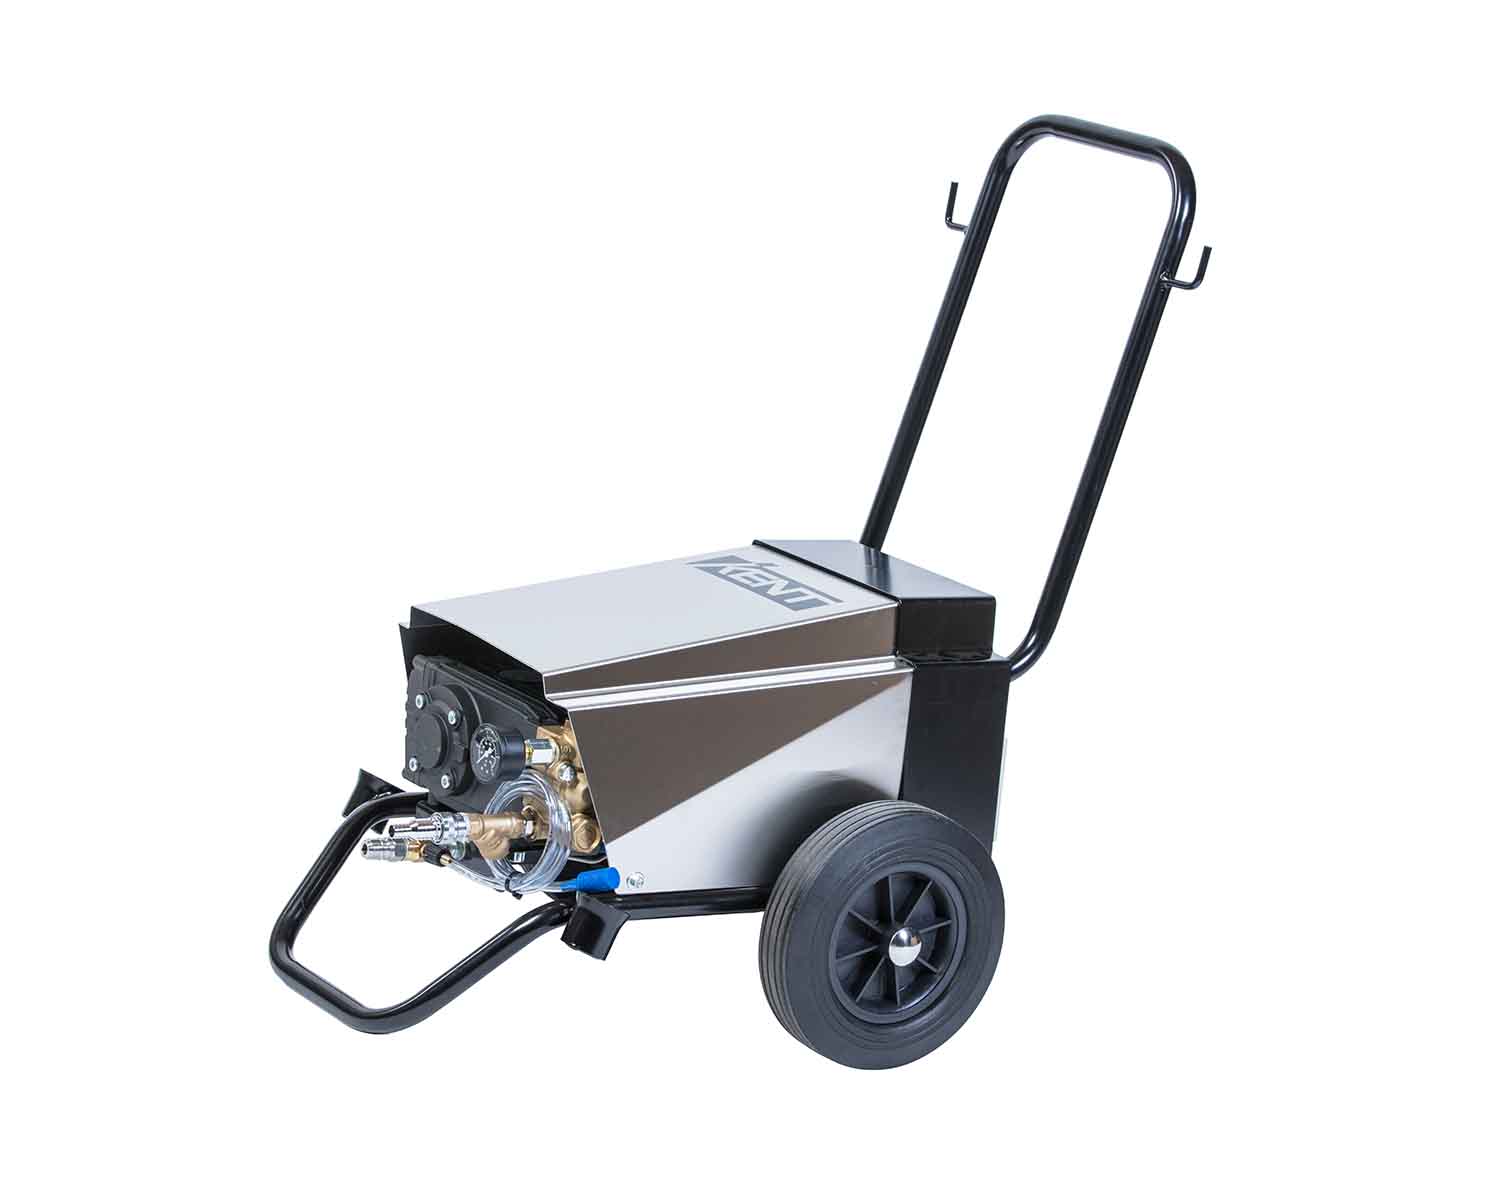 Professional cold water professional pressure washer on 2 wheels